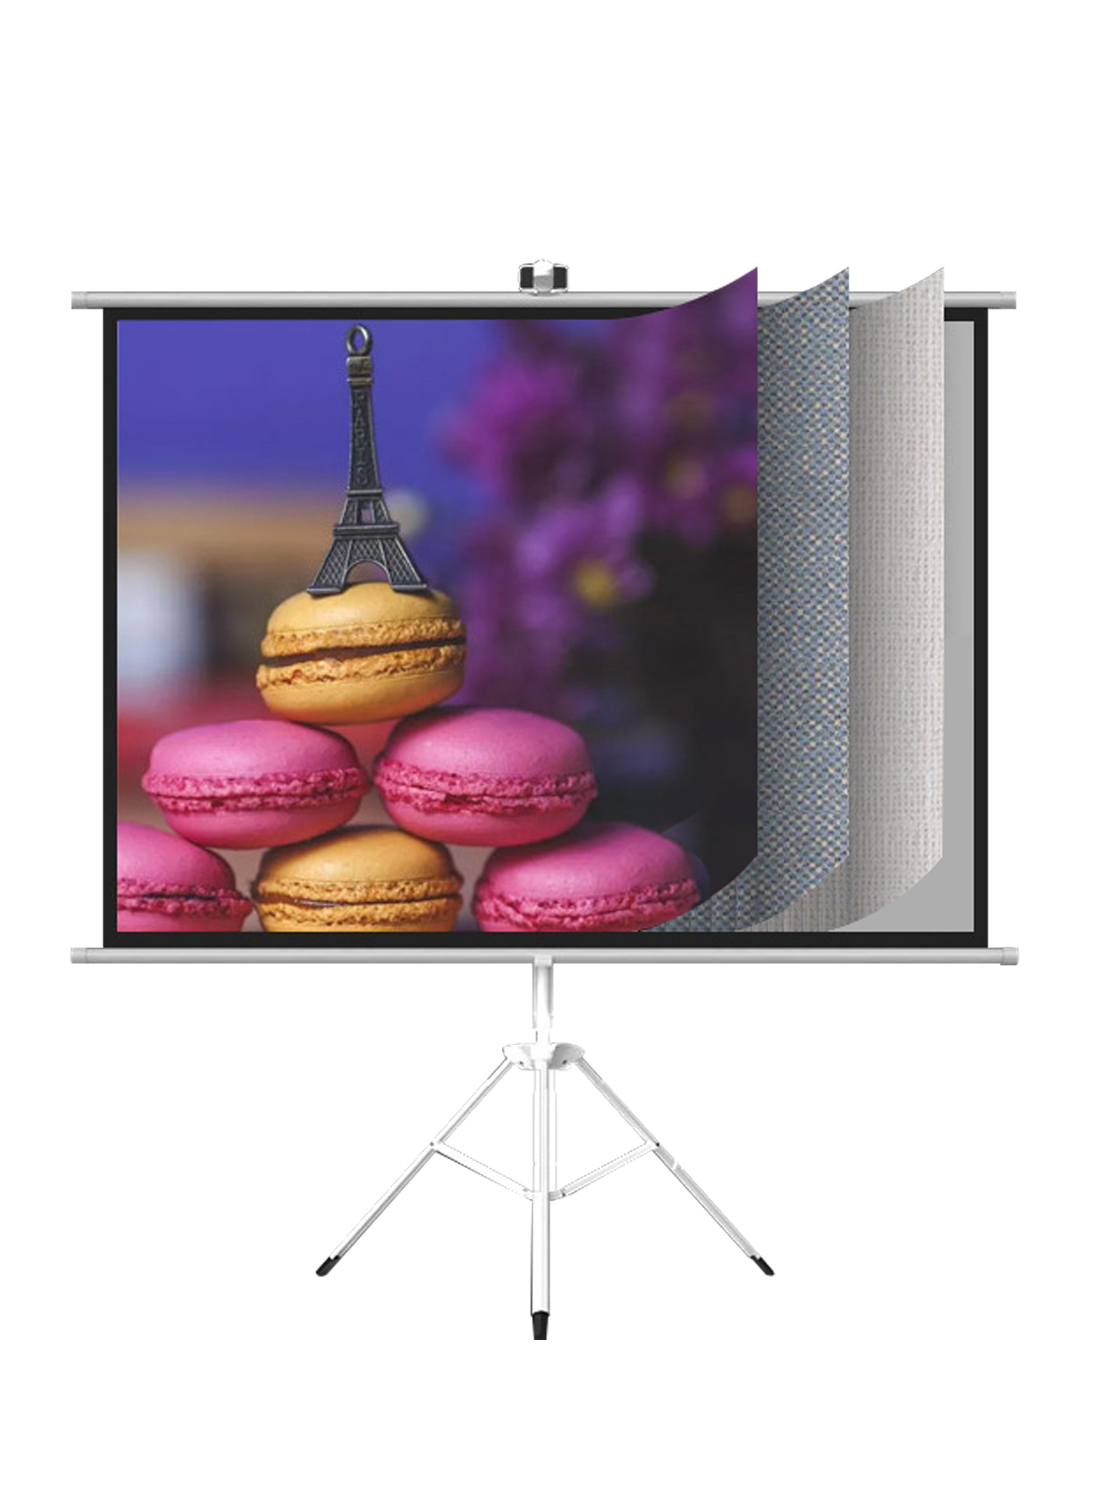 84 inch 16:9 Portable Projection Screen, 2-in-1 Wall Mount & Tripod Stand. White Fiberglass Material, Projector Screen for Outdoor and Indoor